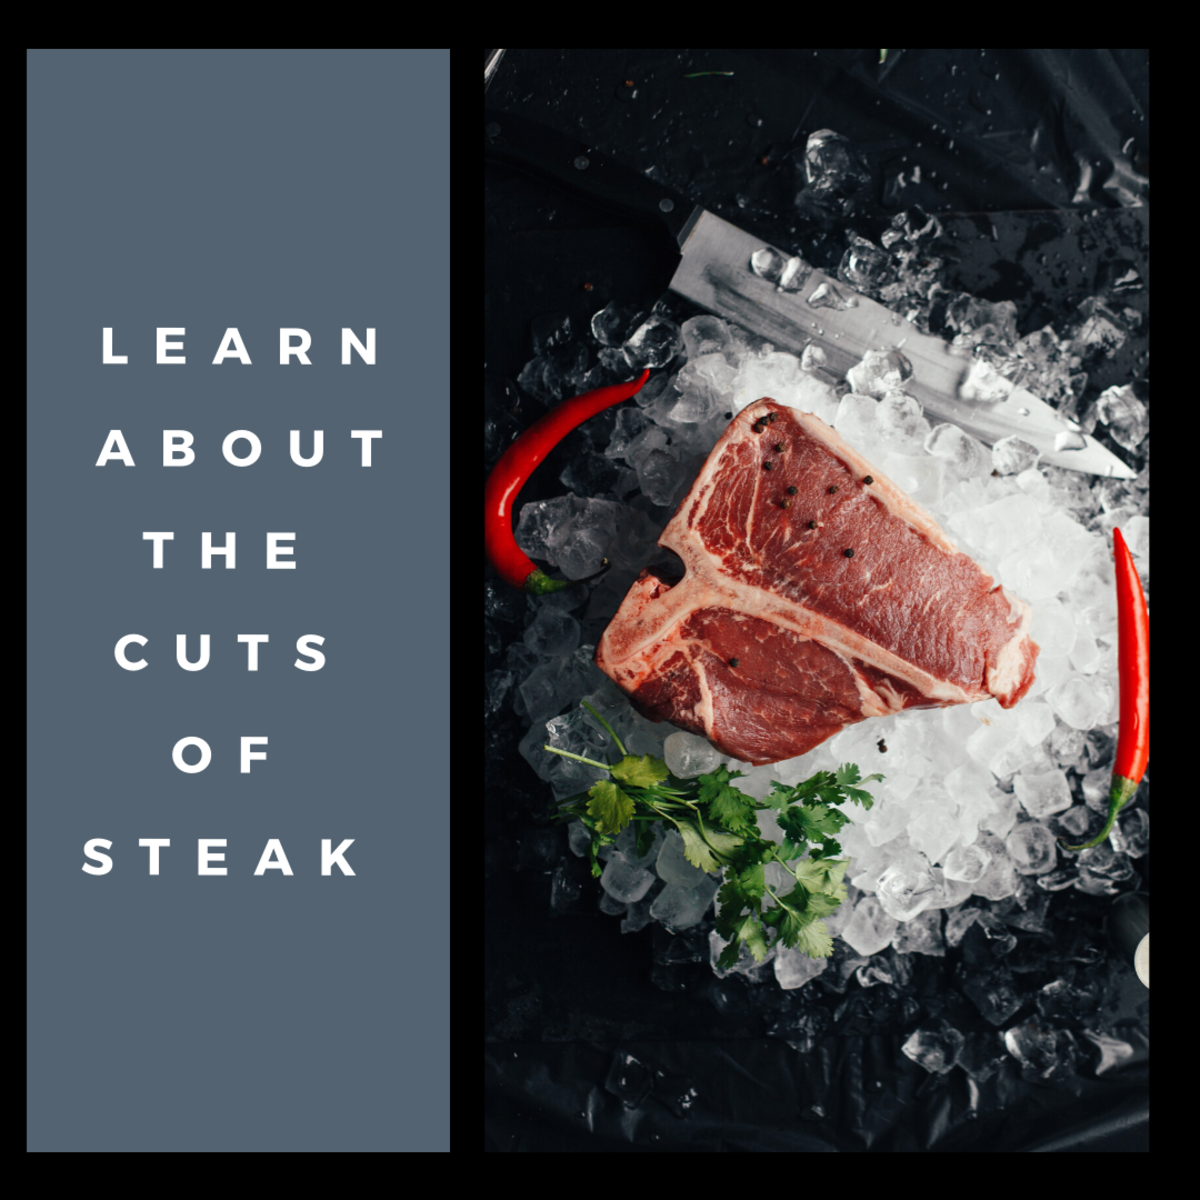 Different cuts of steak require different cooking methods. Read on to learn more.